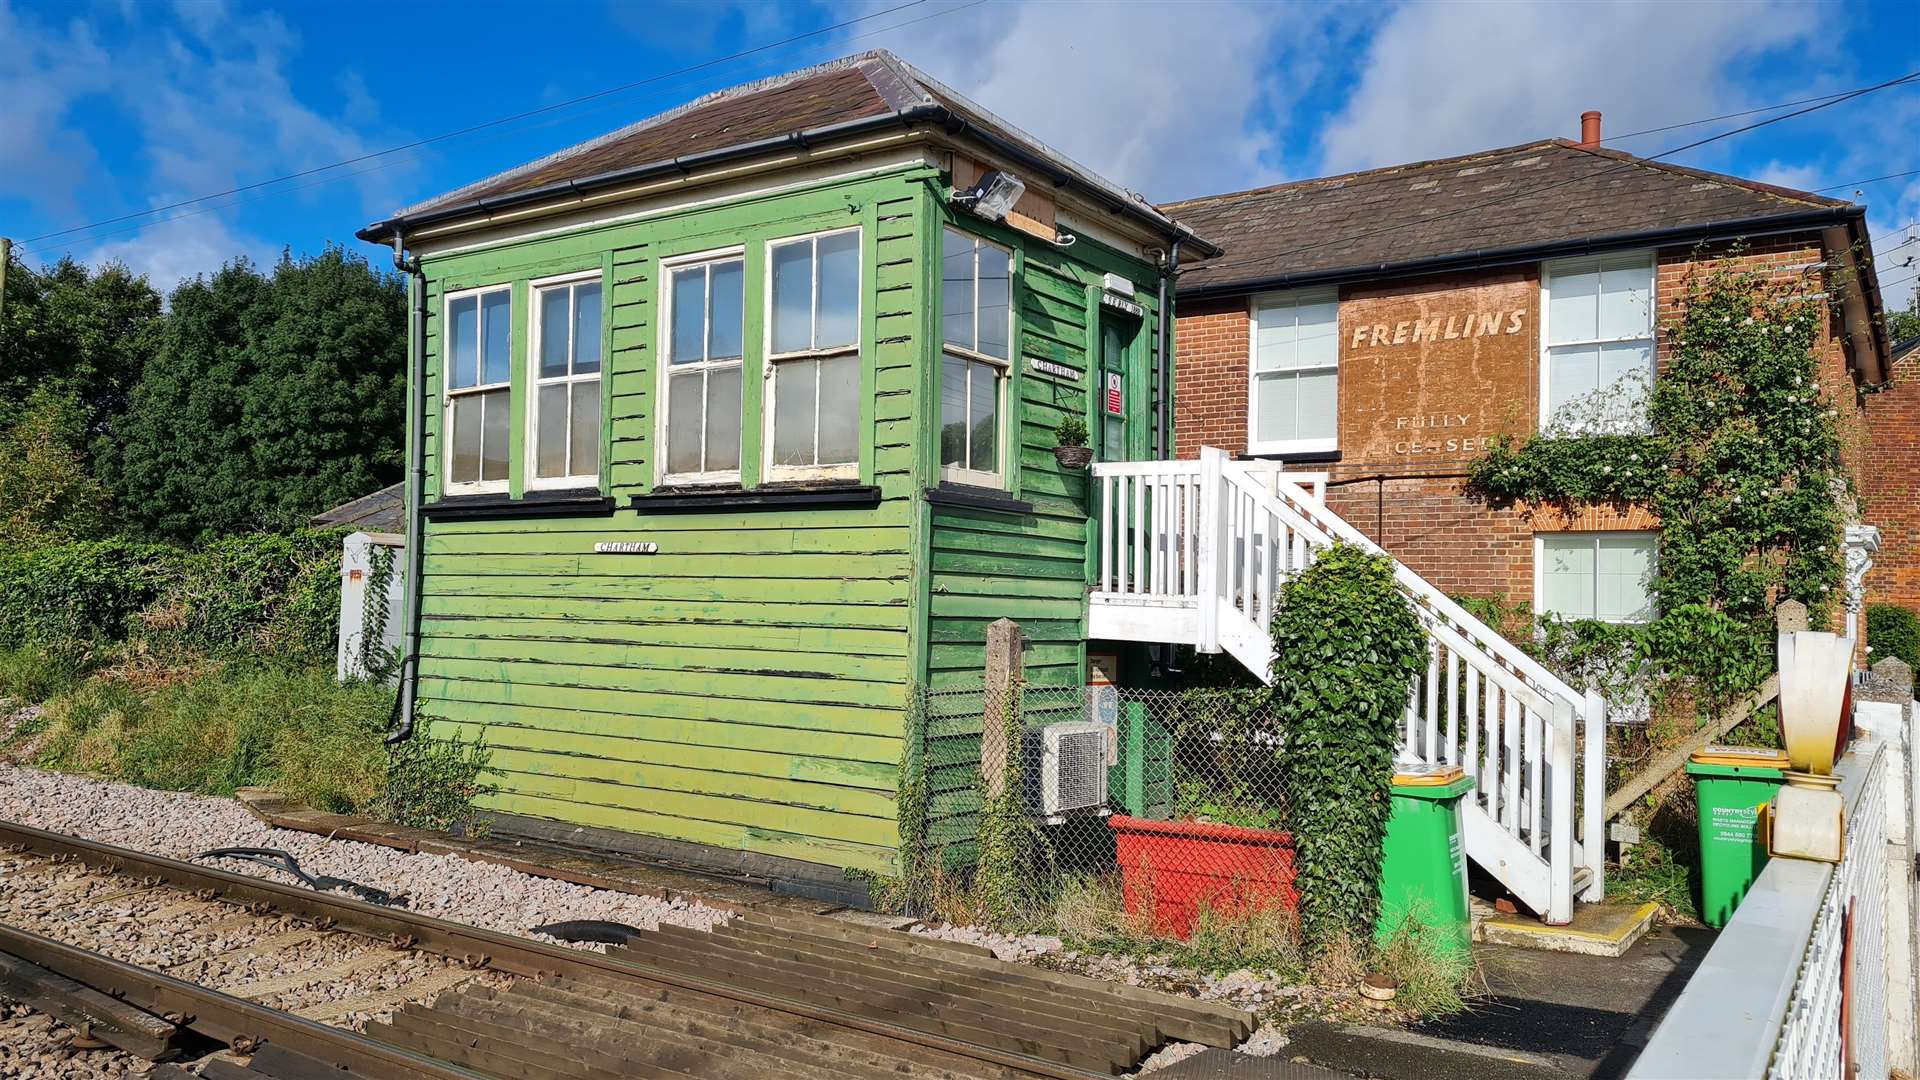 The Chartham signal box has been part of the village for more than 130 years